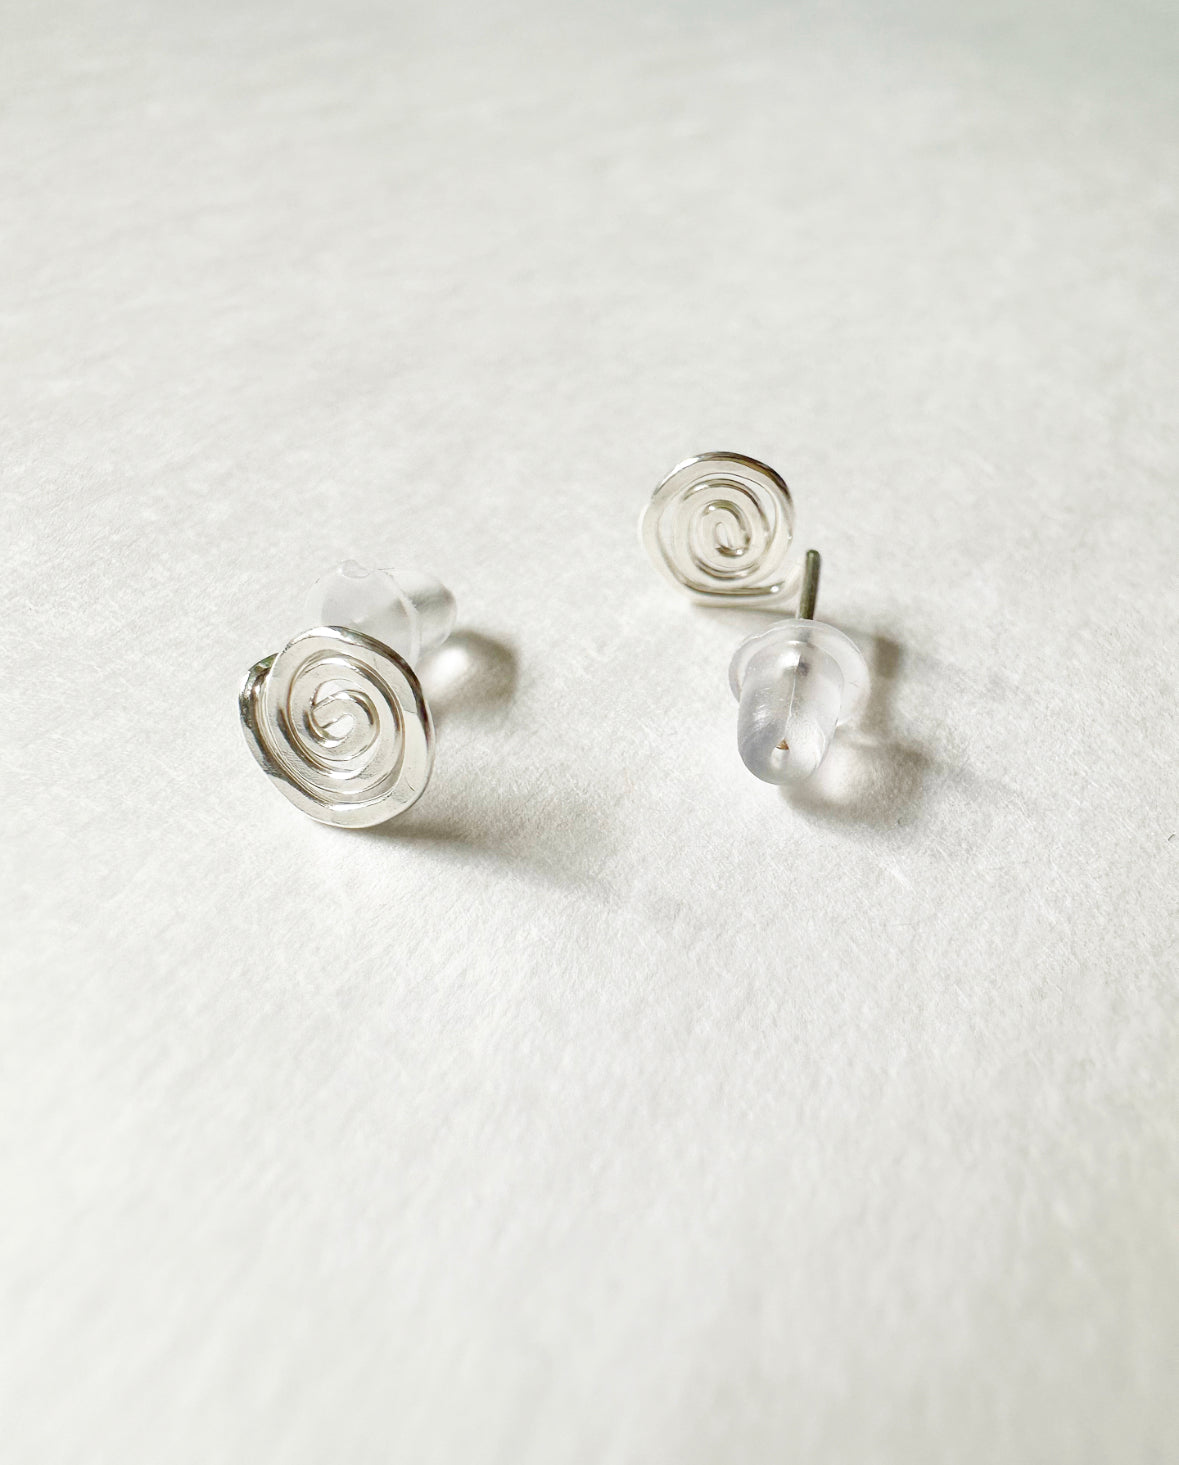 Front and back view of Silver Vortex Stud Earrings with silicone backs.